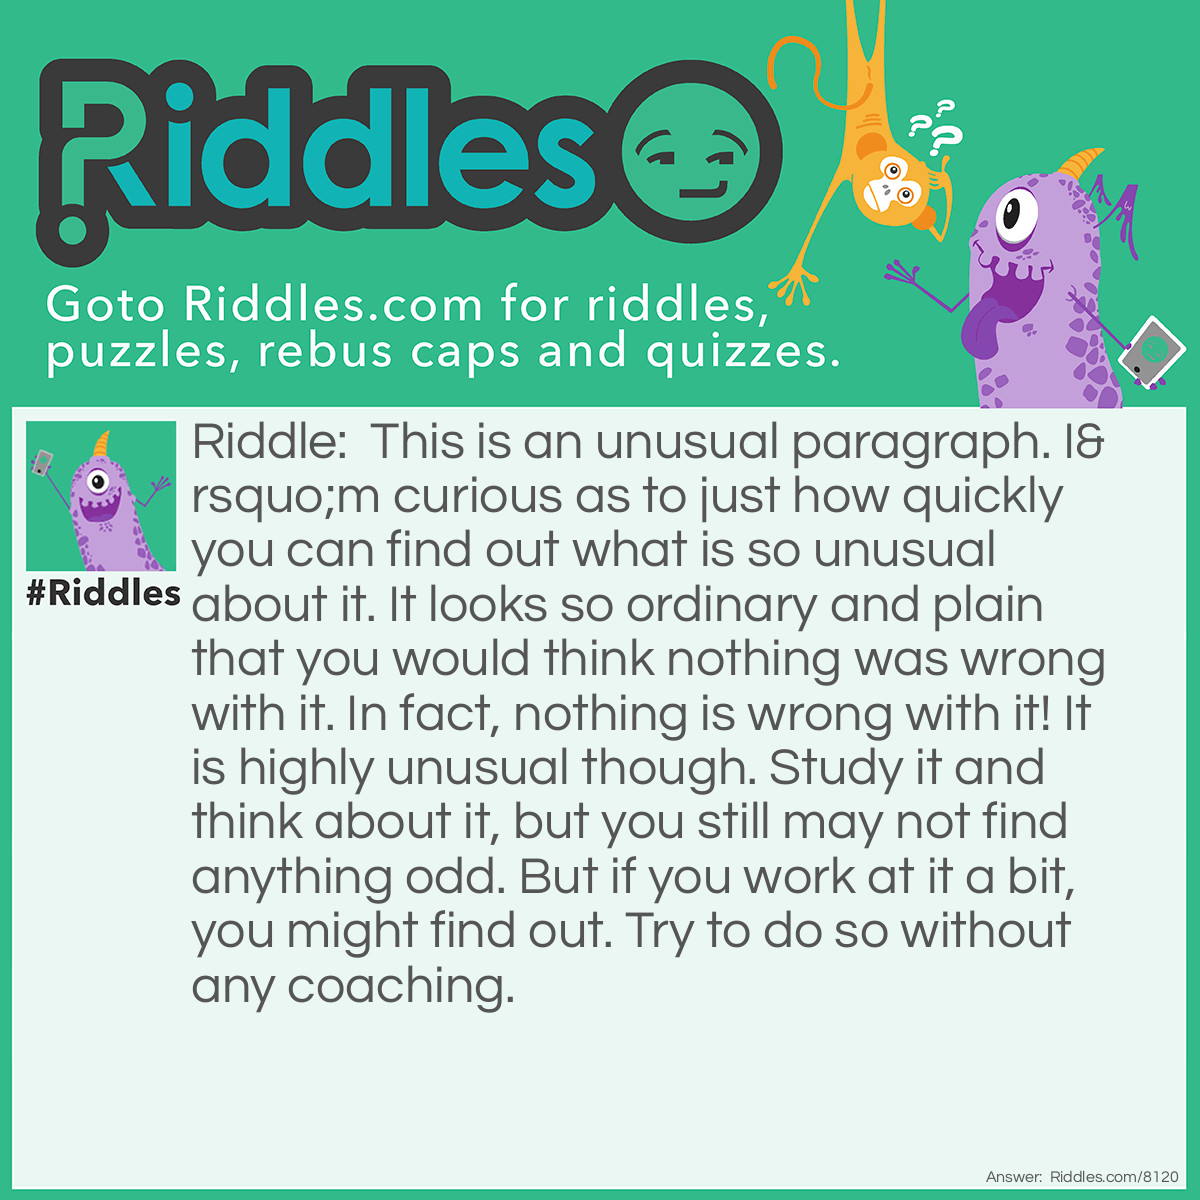 Riddle: This is an unusual paragraph. I'm curious as to just how quickly you can find out what is so unusual about it. It looks so ordinary and plain that you would think nothing was wrong with it. In fact, nothing is wrong with it! It is highly unusual though. Study it and think about it, but you still may not find anything odd. But if you work at it a bit, you might find out. Try to do so without any coaching. Answer: The letter E. The most common letter in the english language, is not present in the paragraph